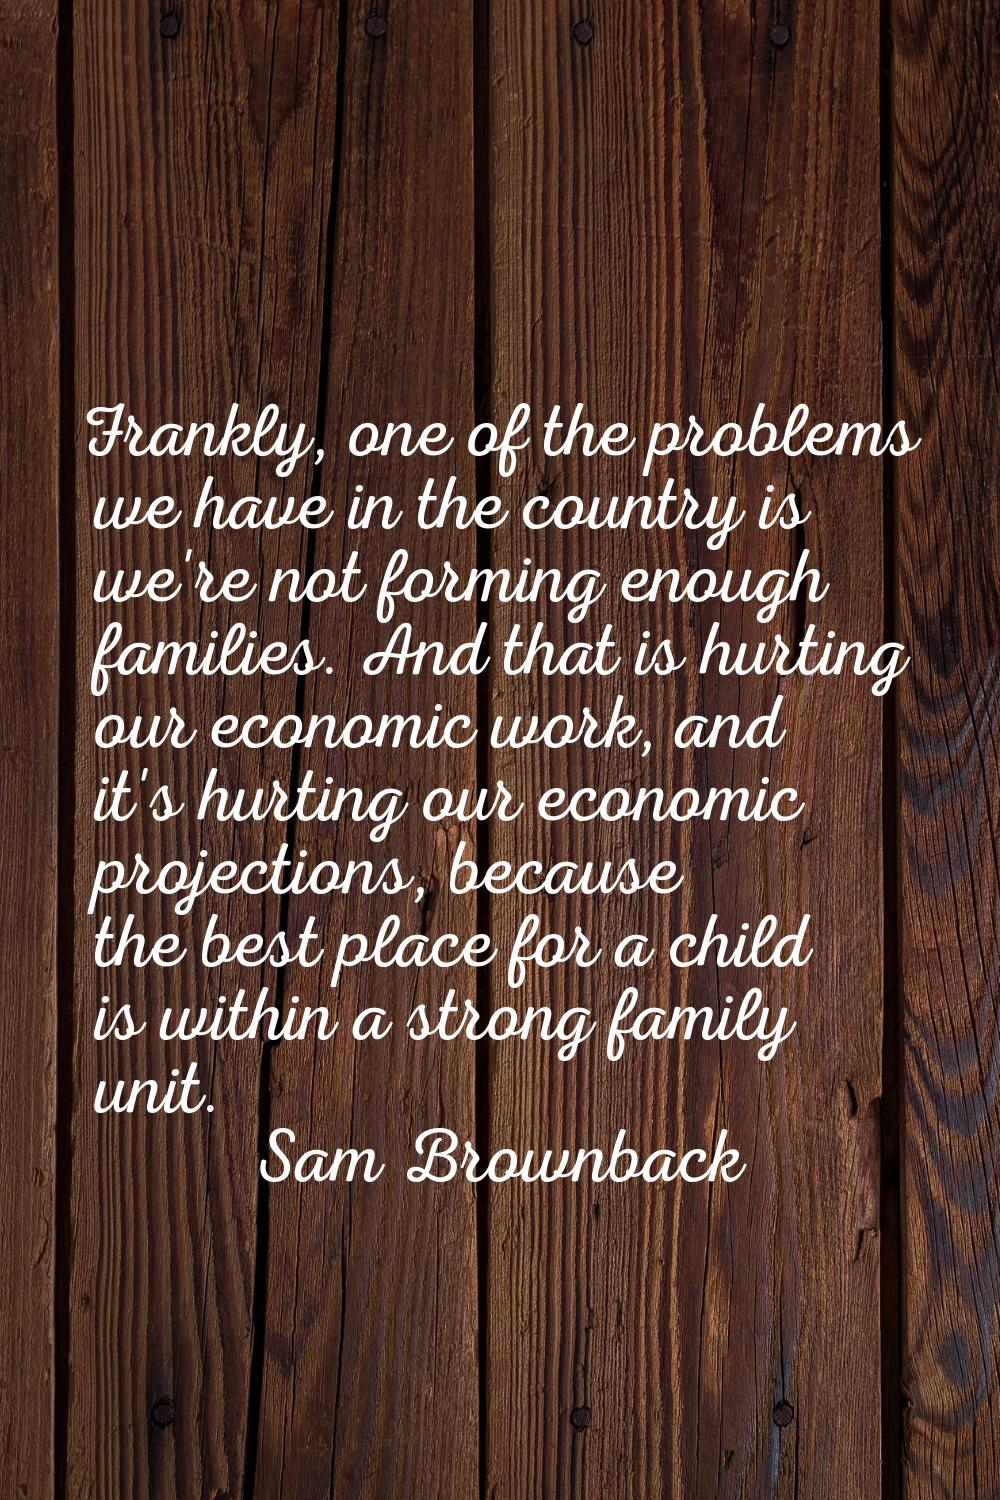 Frankly, one of the problems we have in the country is we're not forming enough families. And that 